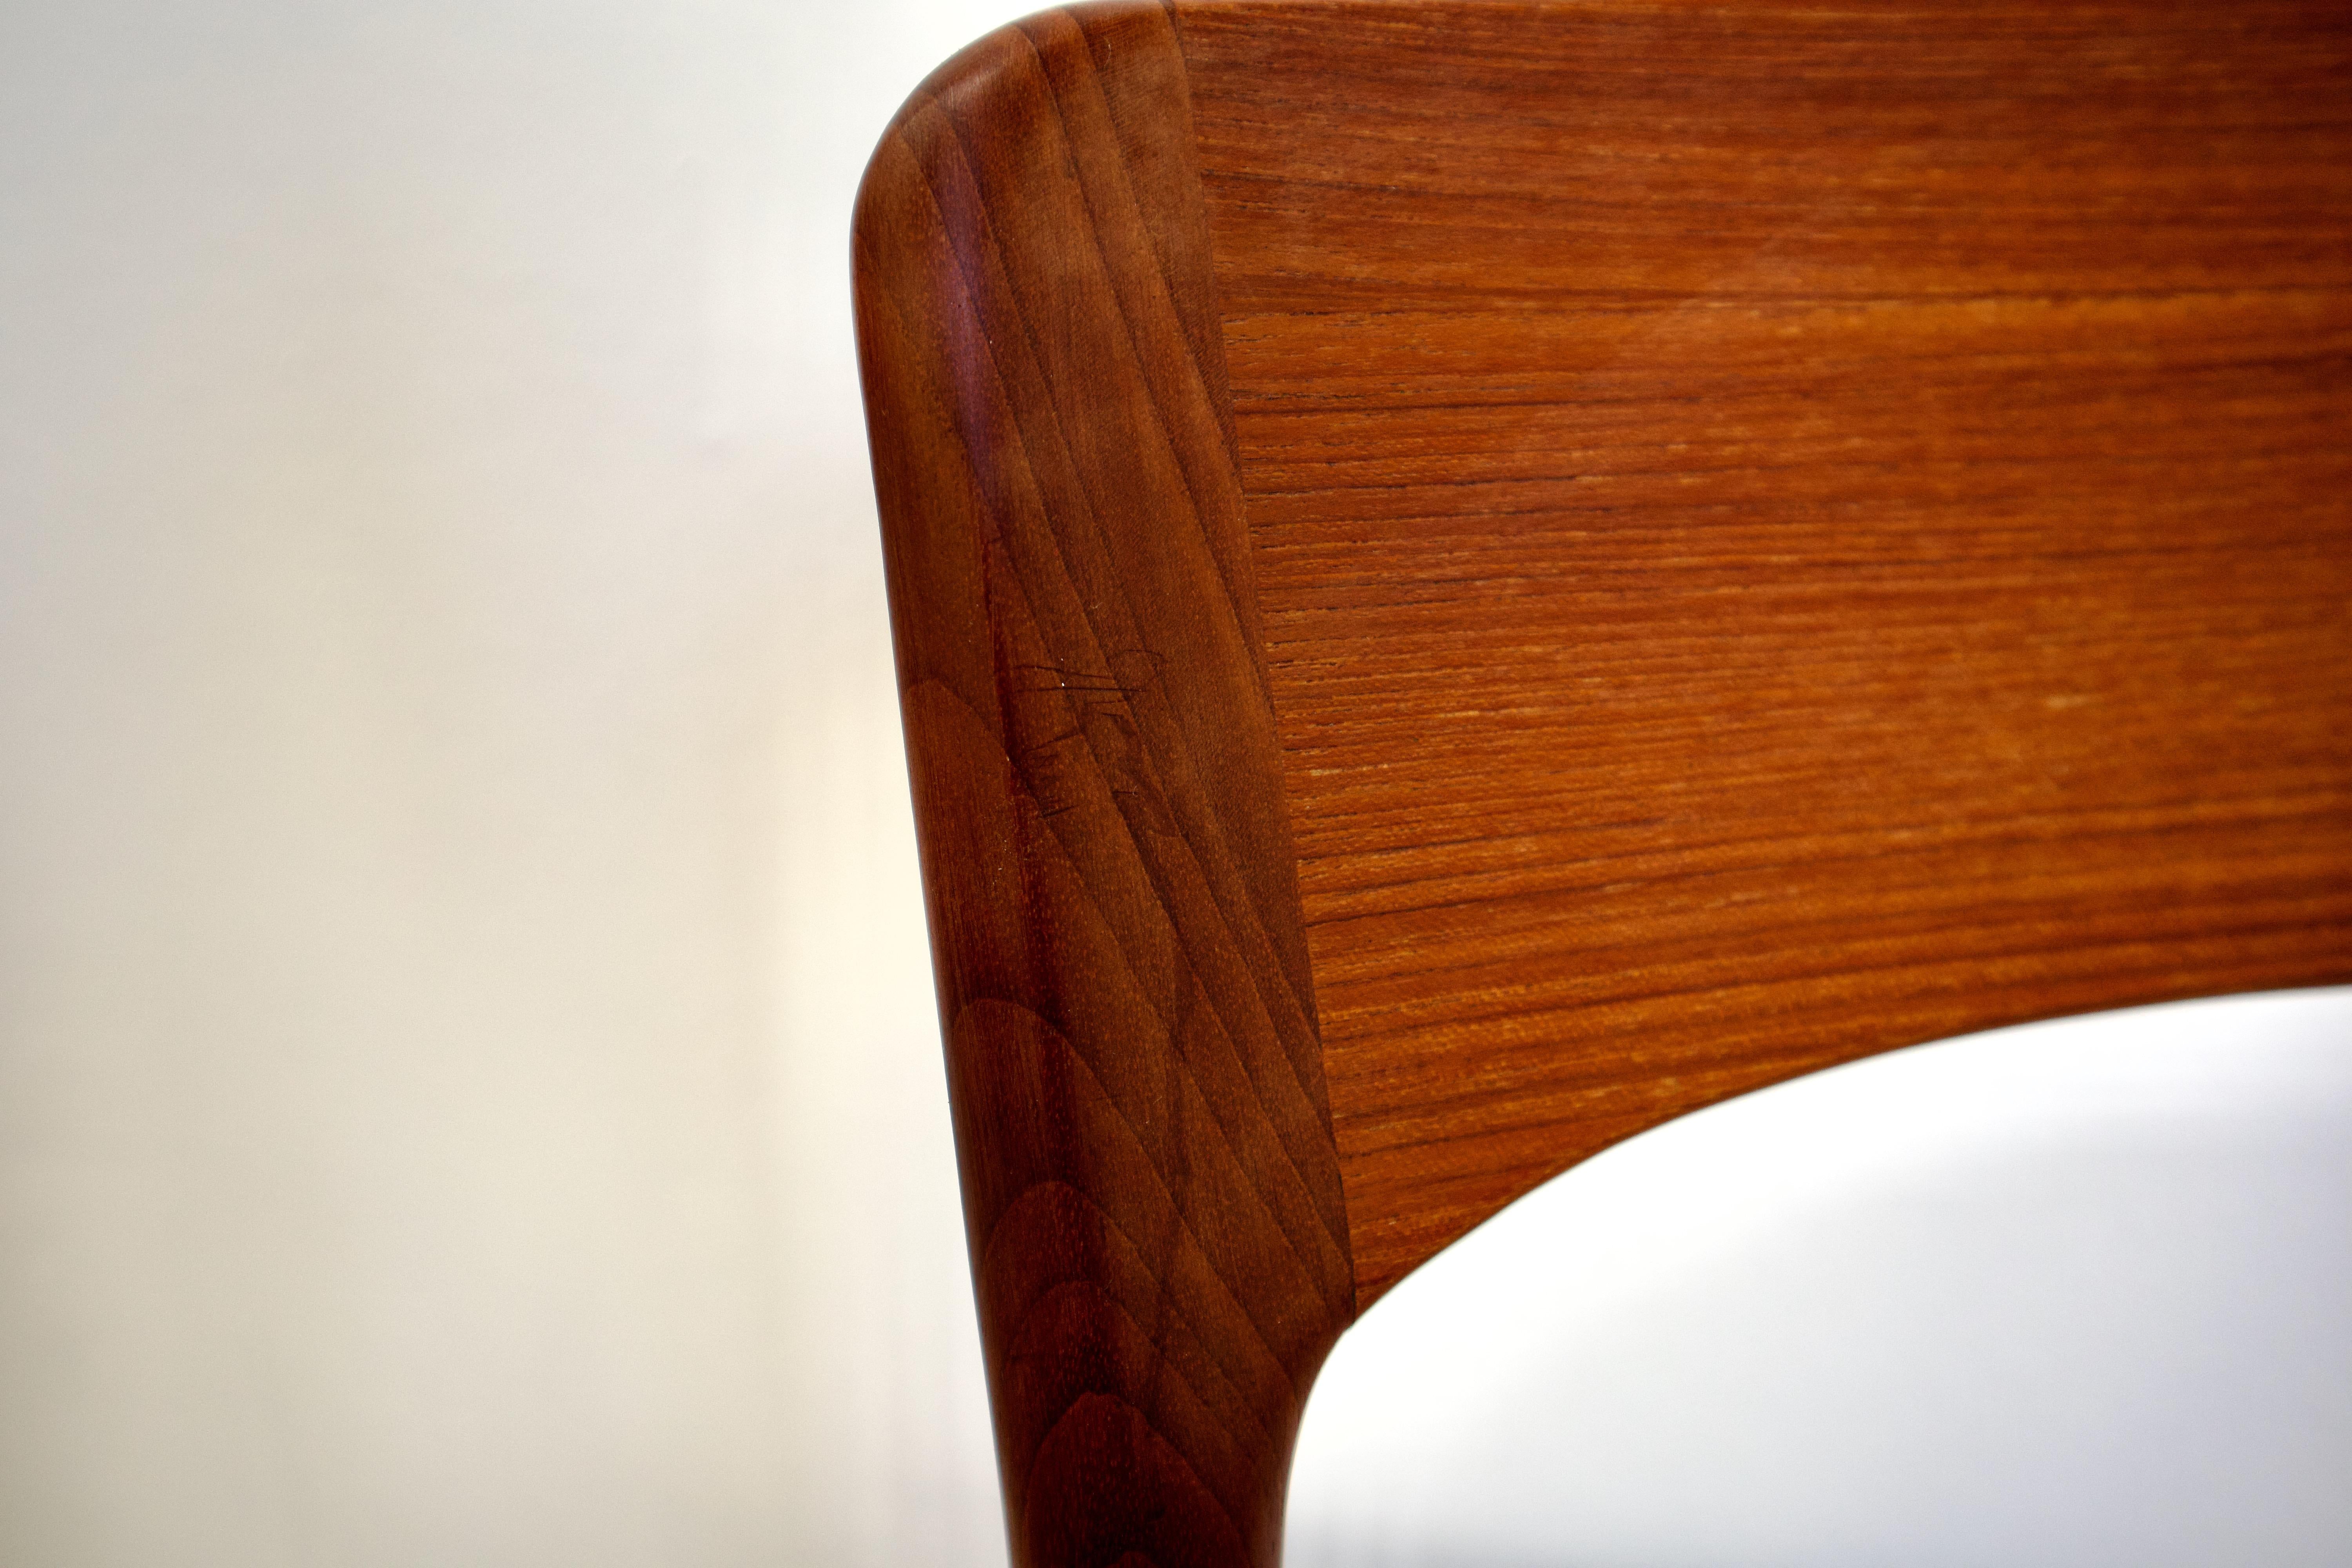 Quirky 1960s Danish Teak Chairs By Kai Kristiansen for K.S. Mobler For Sale 5